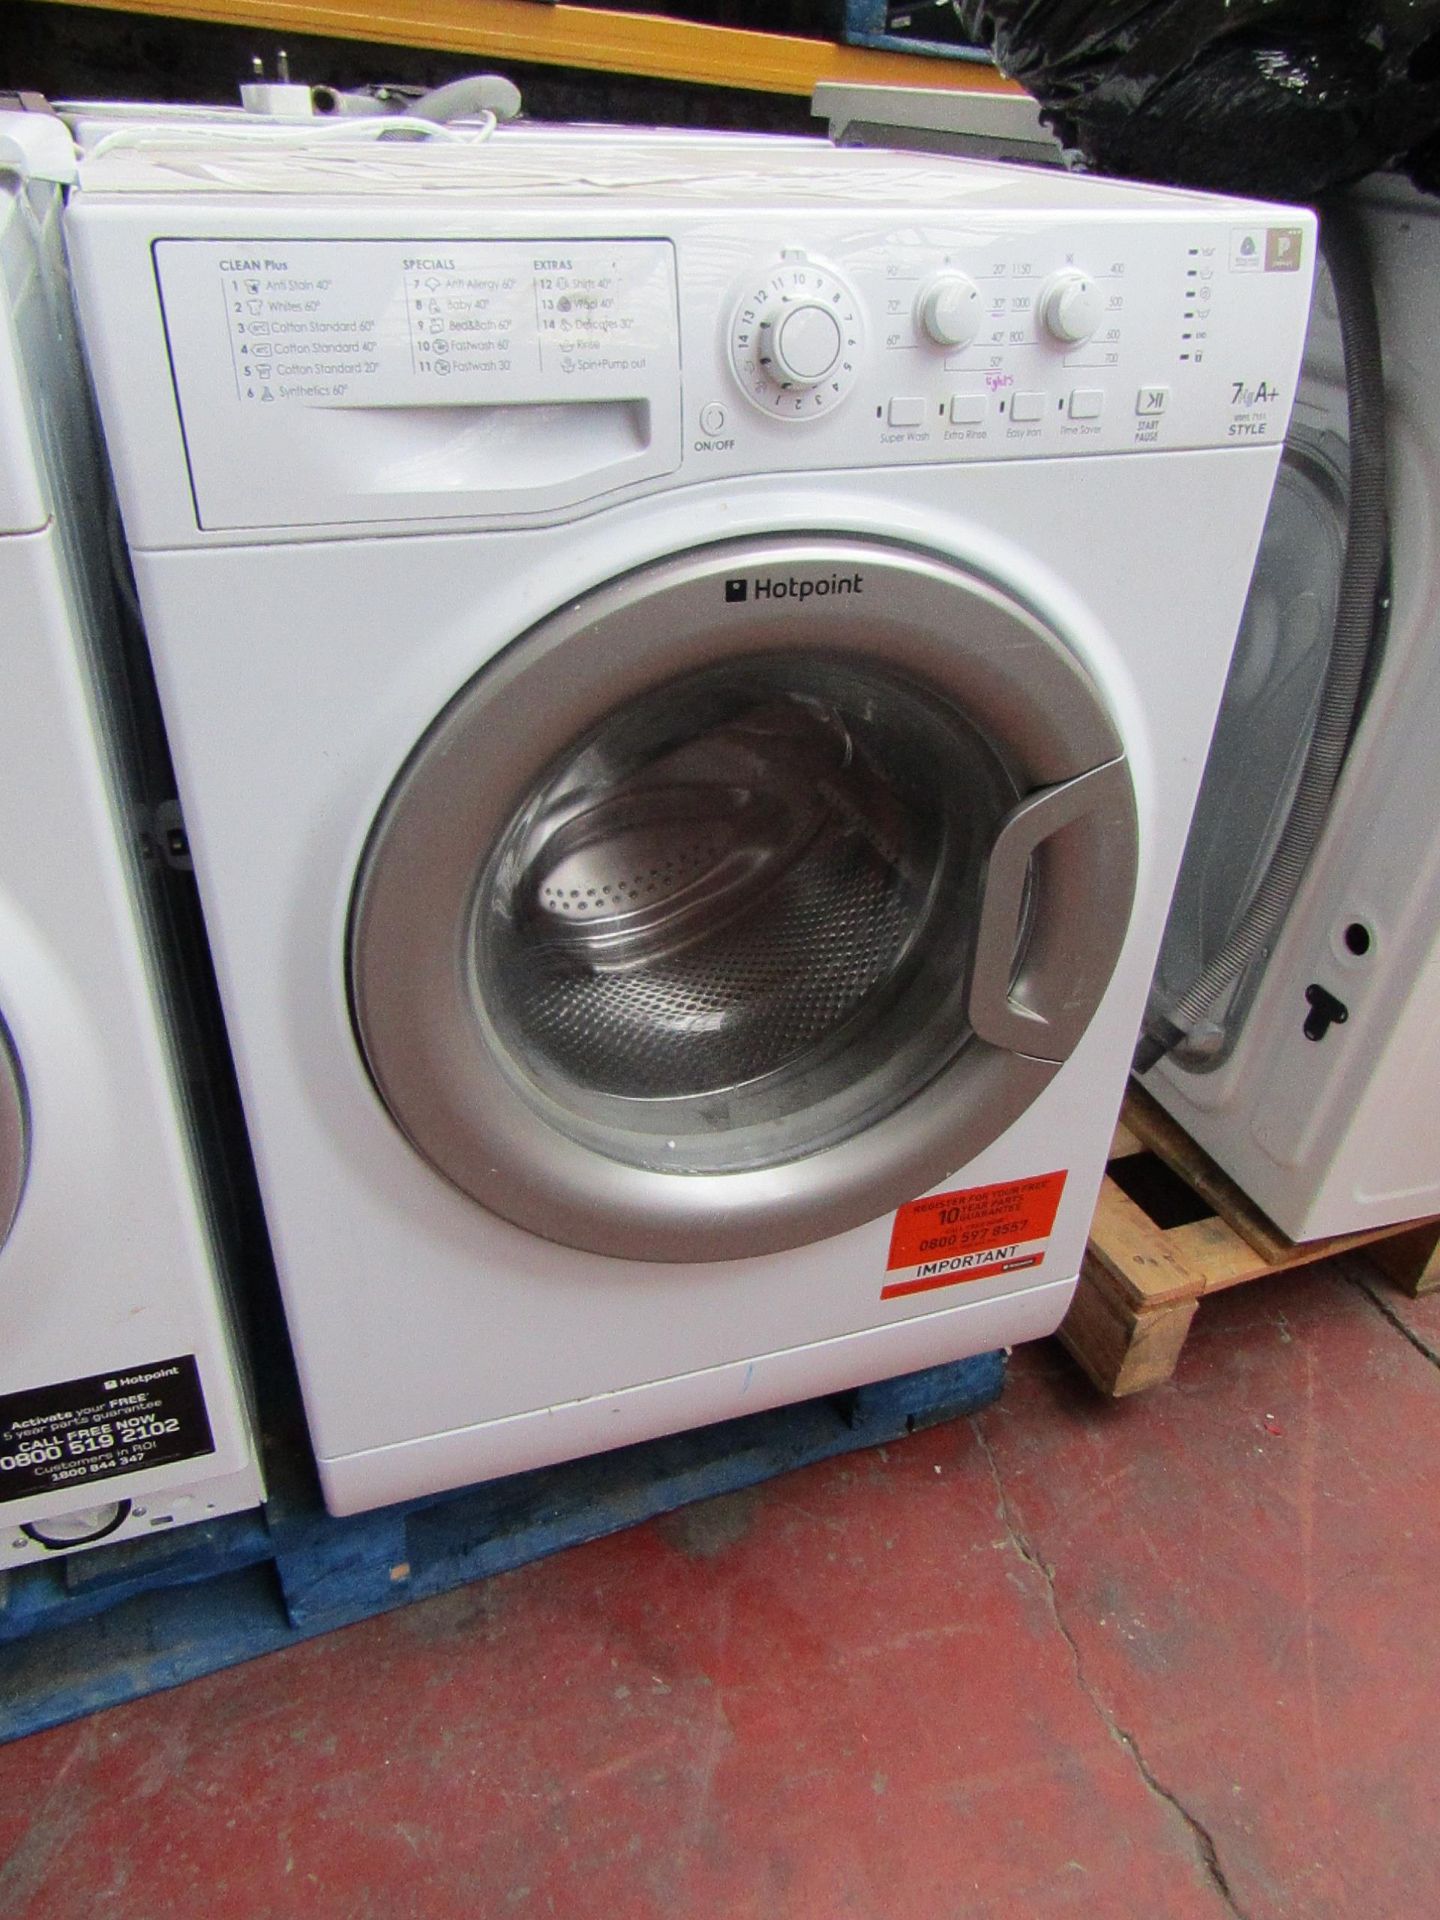 Hotpoint Style 7Kg washing machine, unable to test due to damaged door.